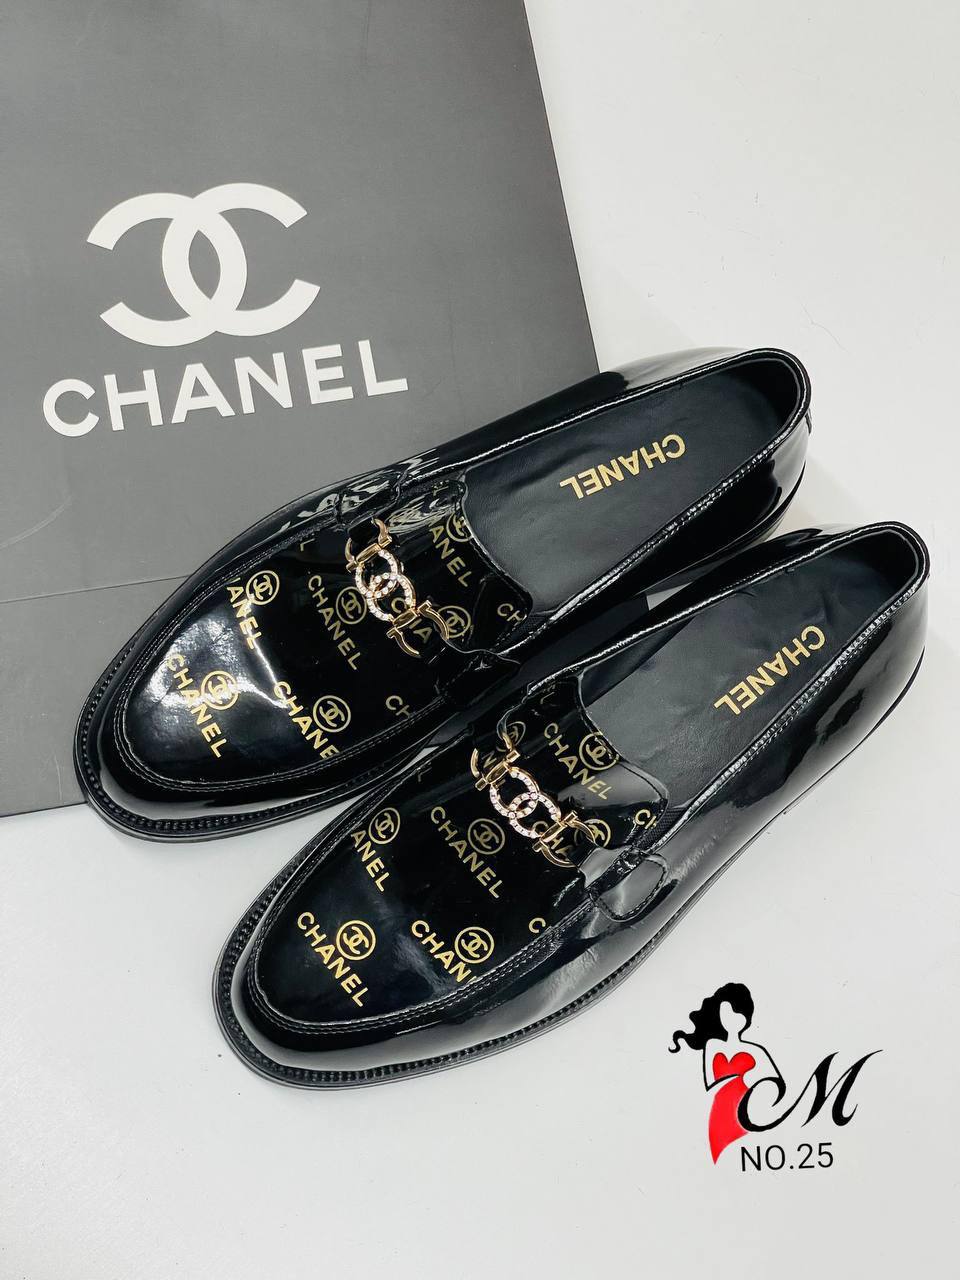 PARIHIL COLLECTIONS – Strictly Turkish Brands  Sneakers men fashion, Sneakers  men, Gucci men shoes